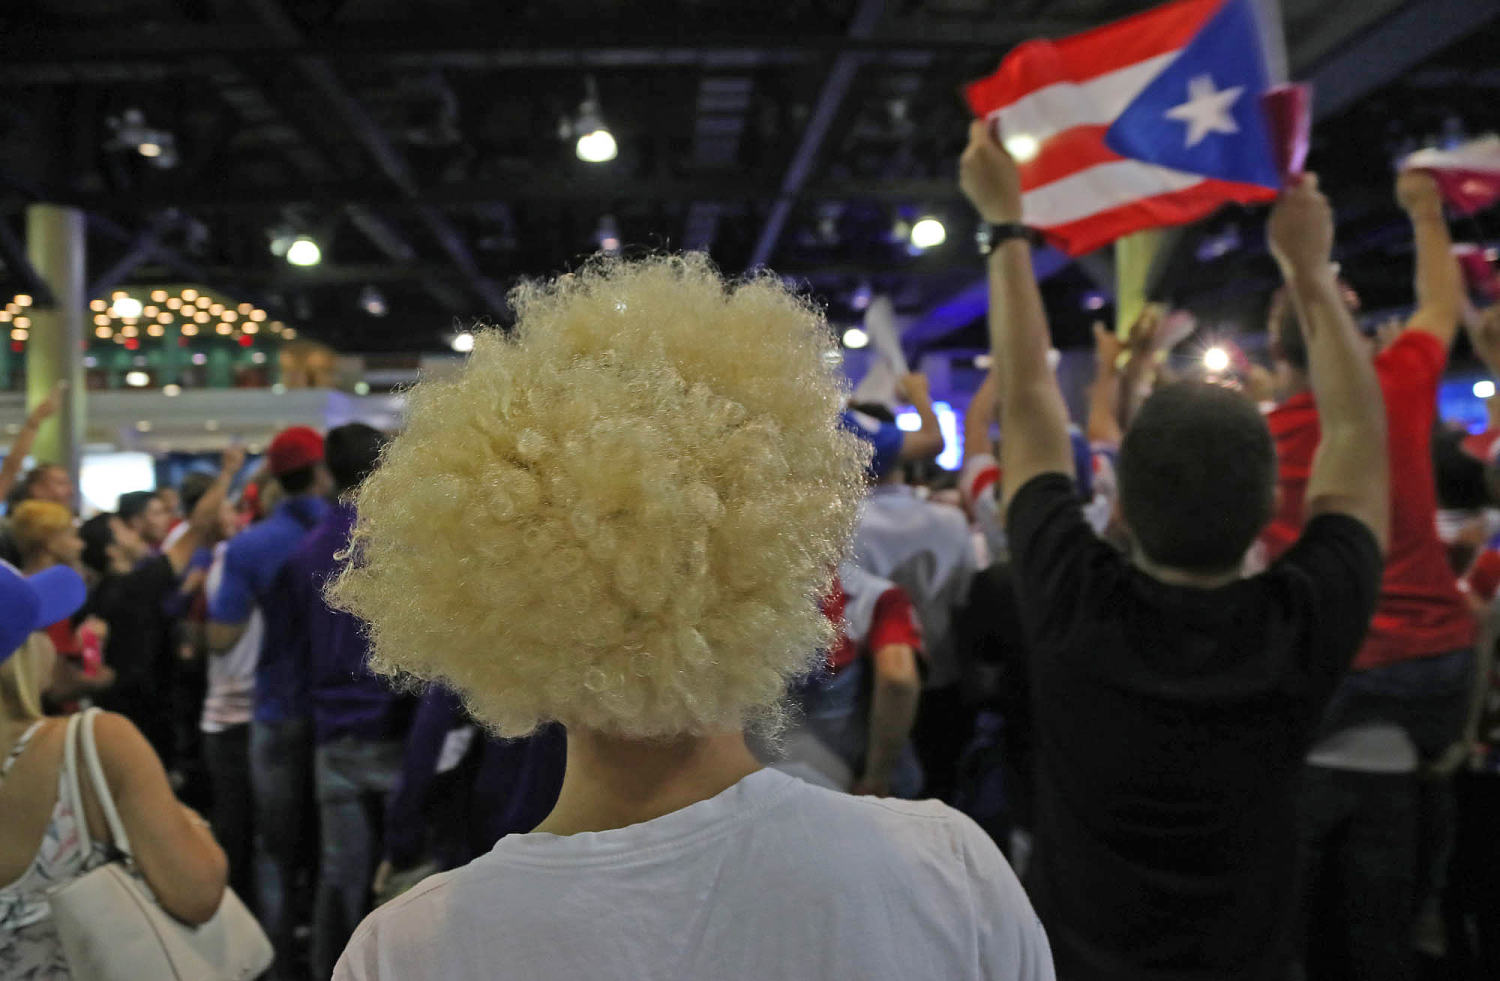 Puerto Rico bans discrimination against people  wearing Afros, other hairstyles